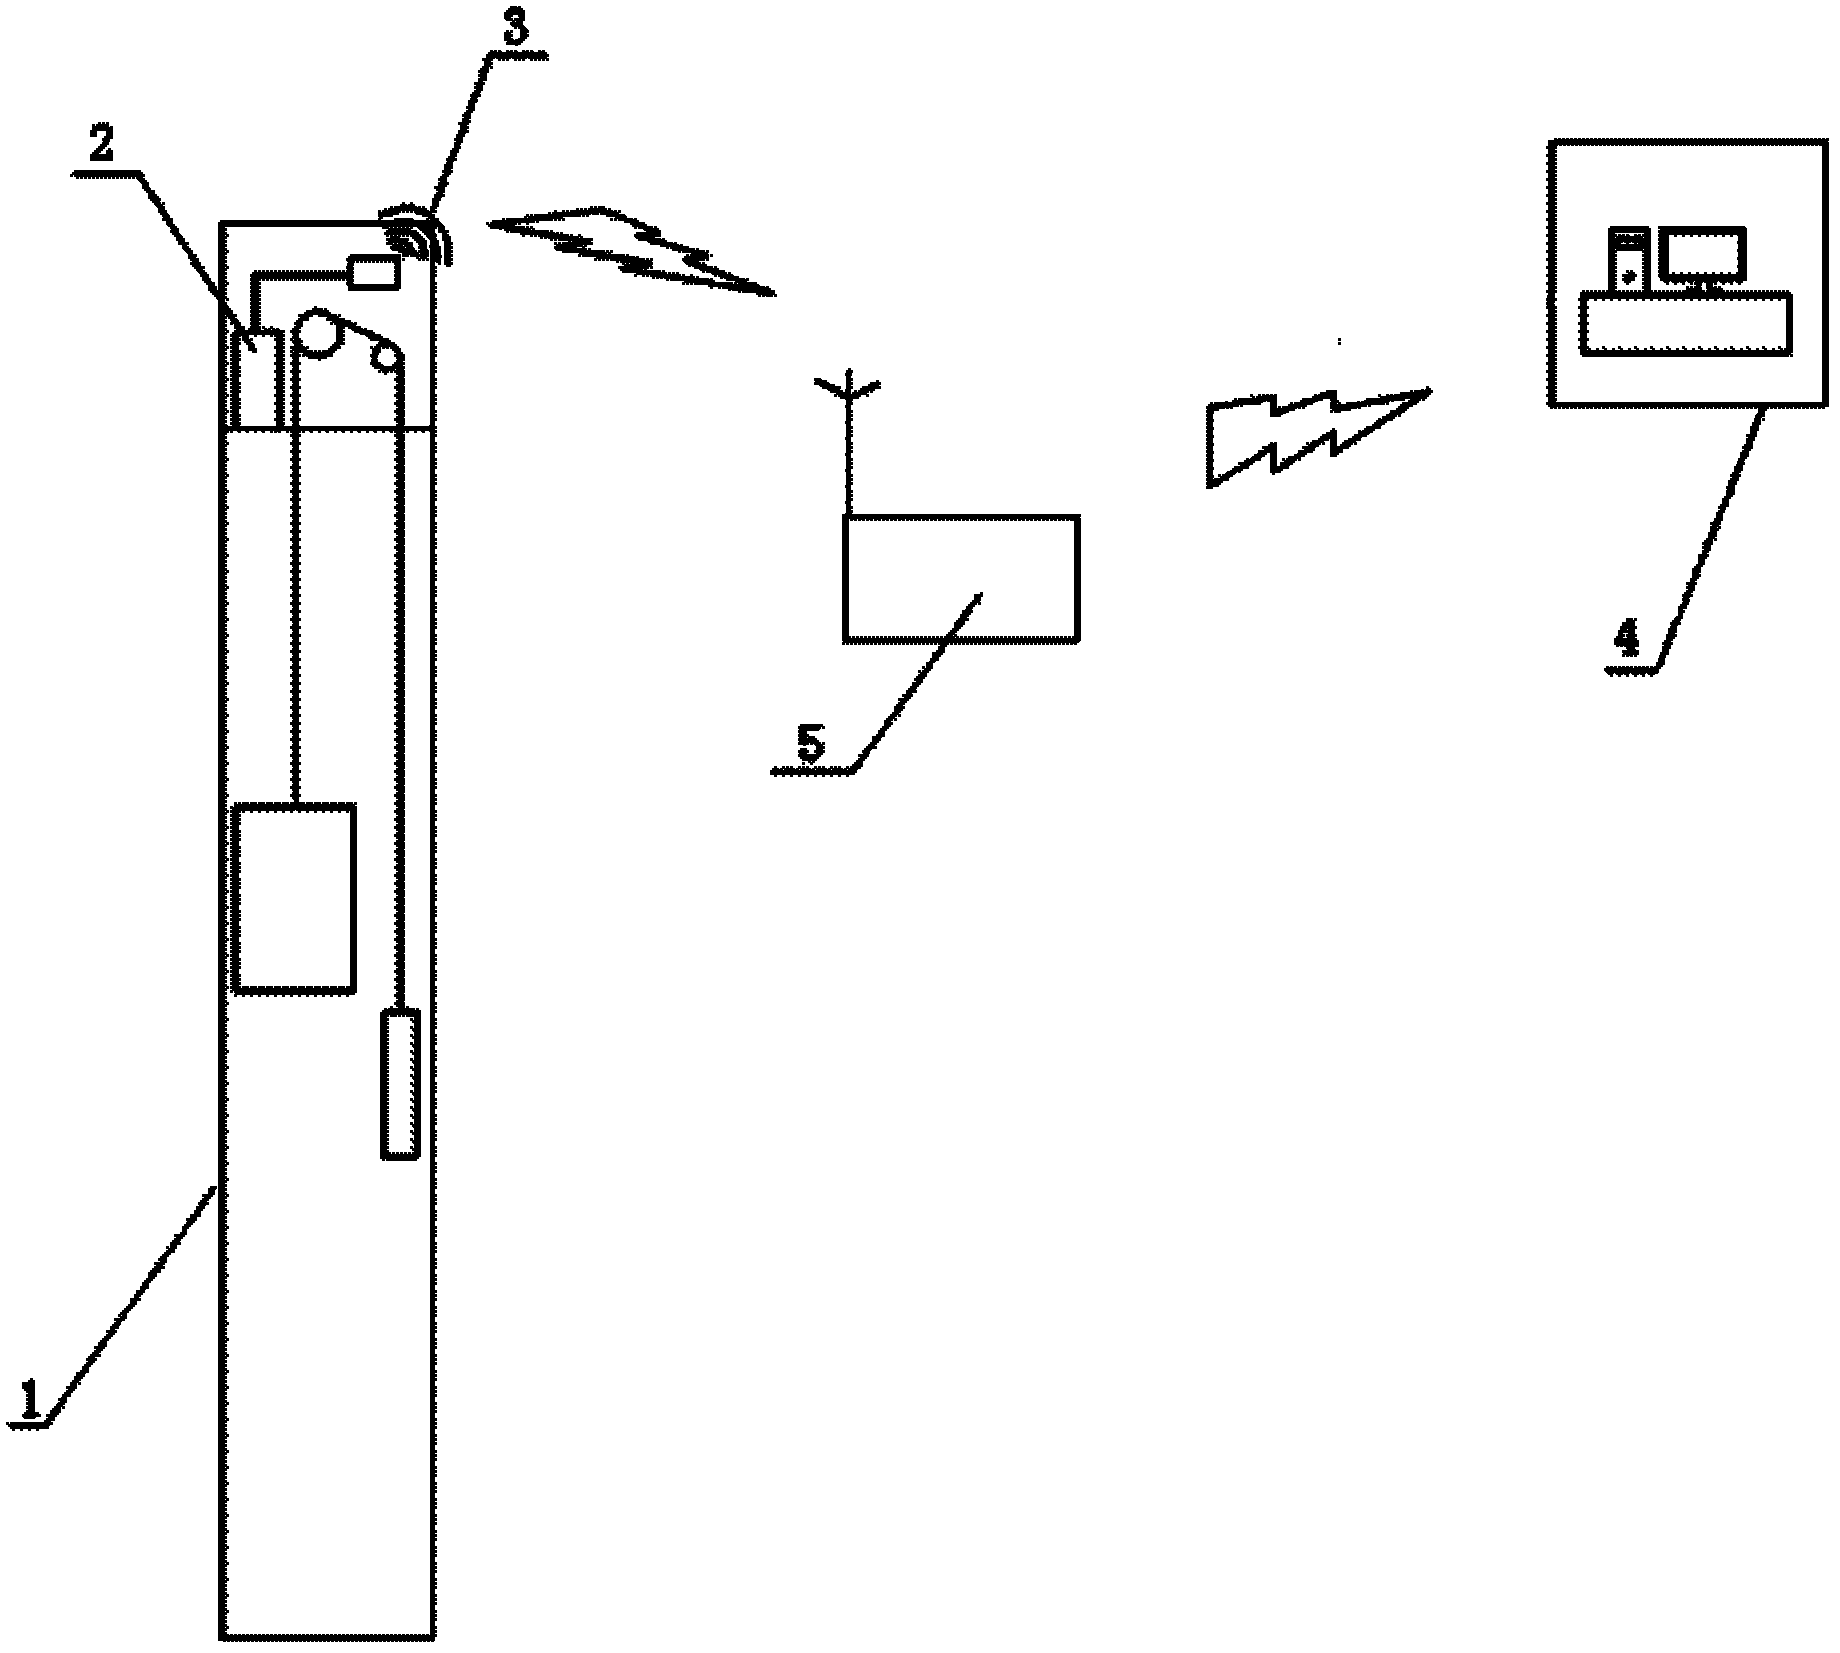 Elevator communication system based on wireless local area network (WLAN)